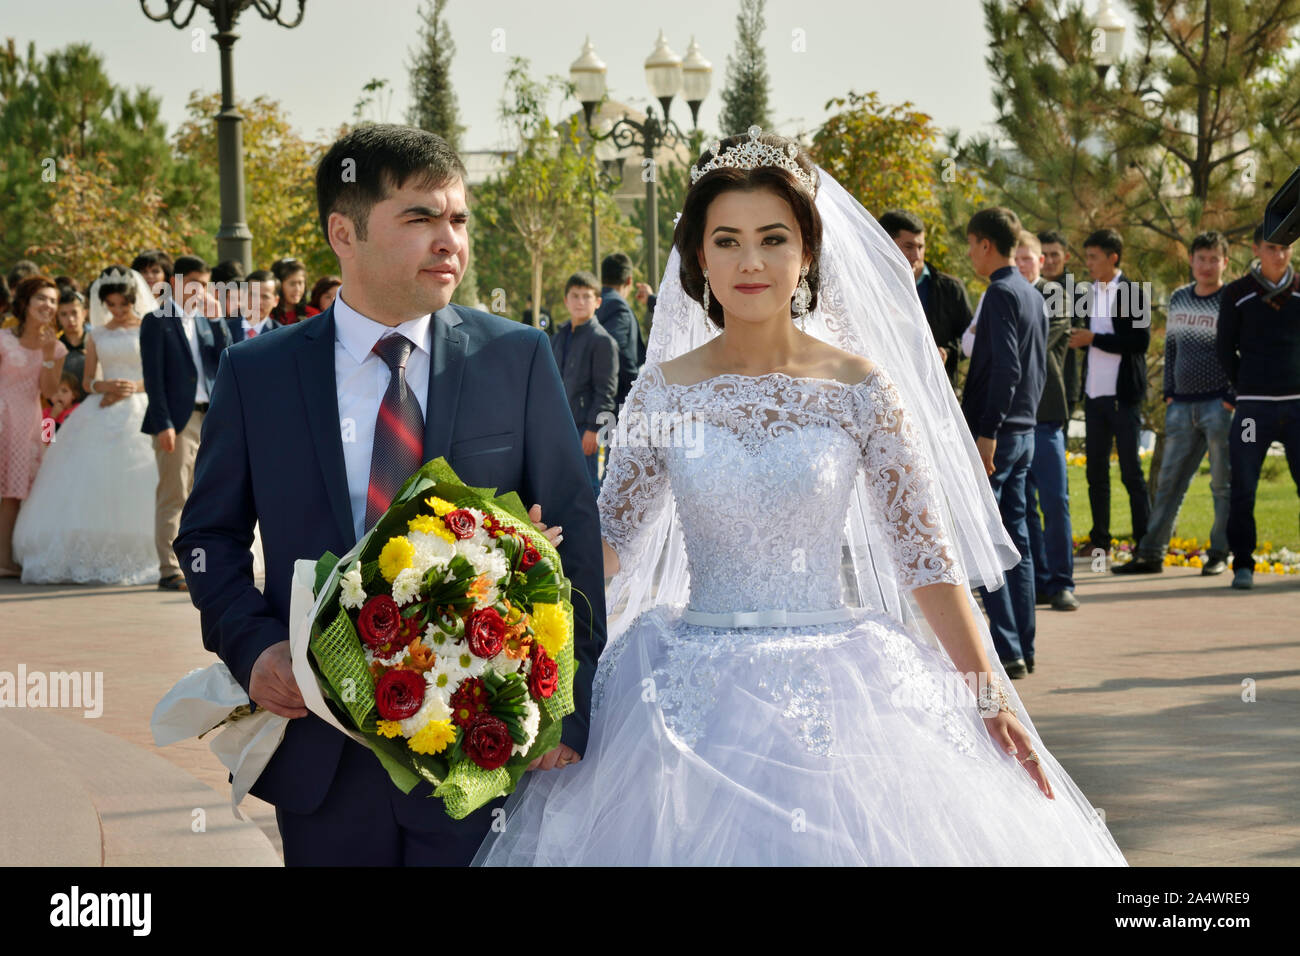 A wedding in front of the statue of the late leader Islam Karimov, a must for the photo sessions. Samarkand, Uzbekistan Stock Photo